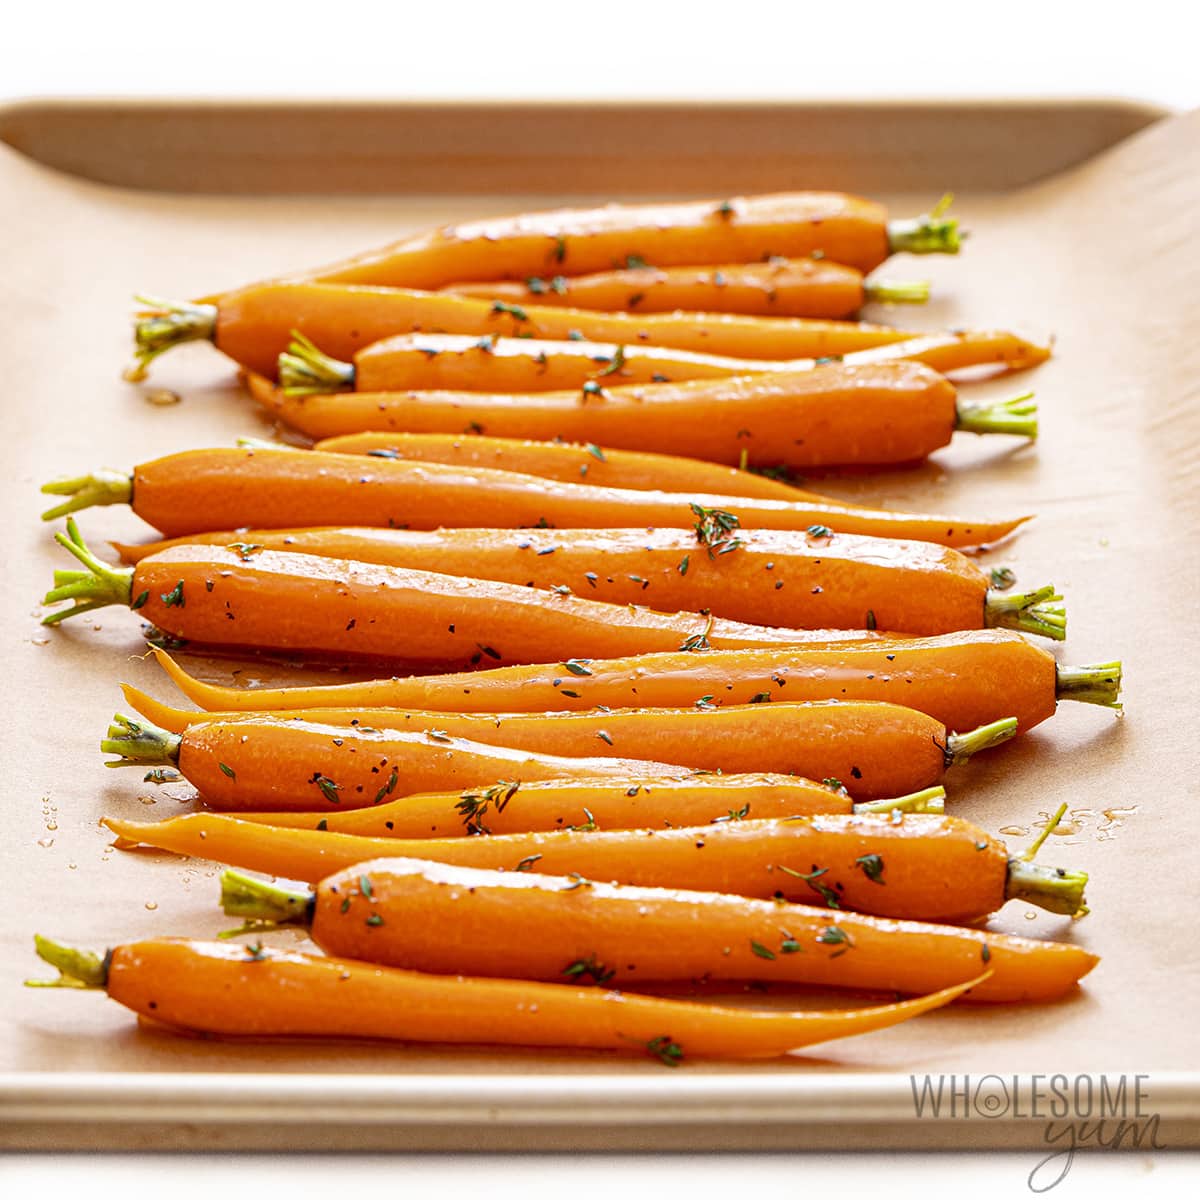 Place raw carrots and honey mixture on lined baking sheet.